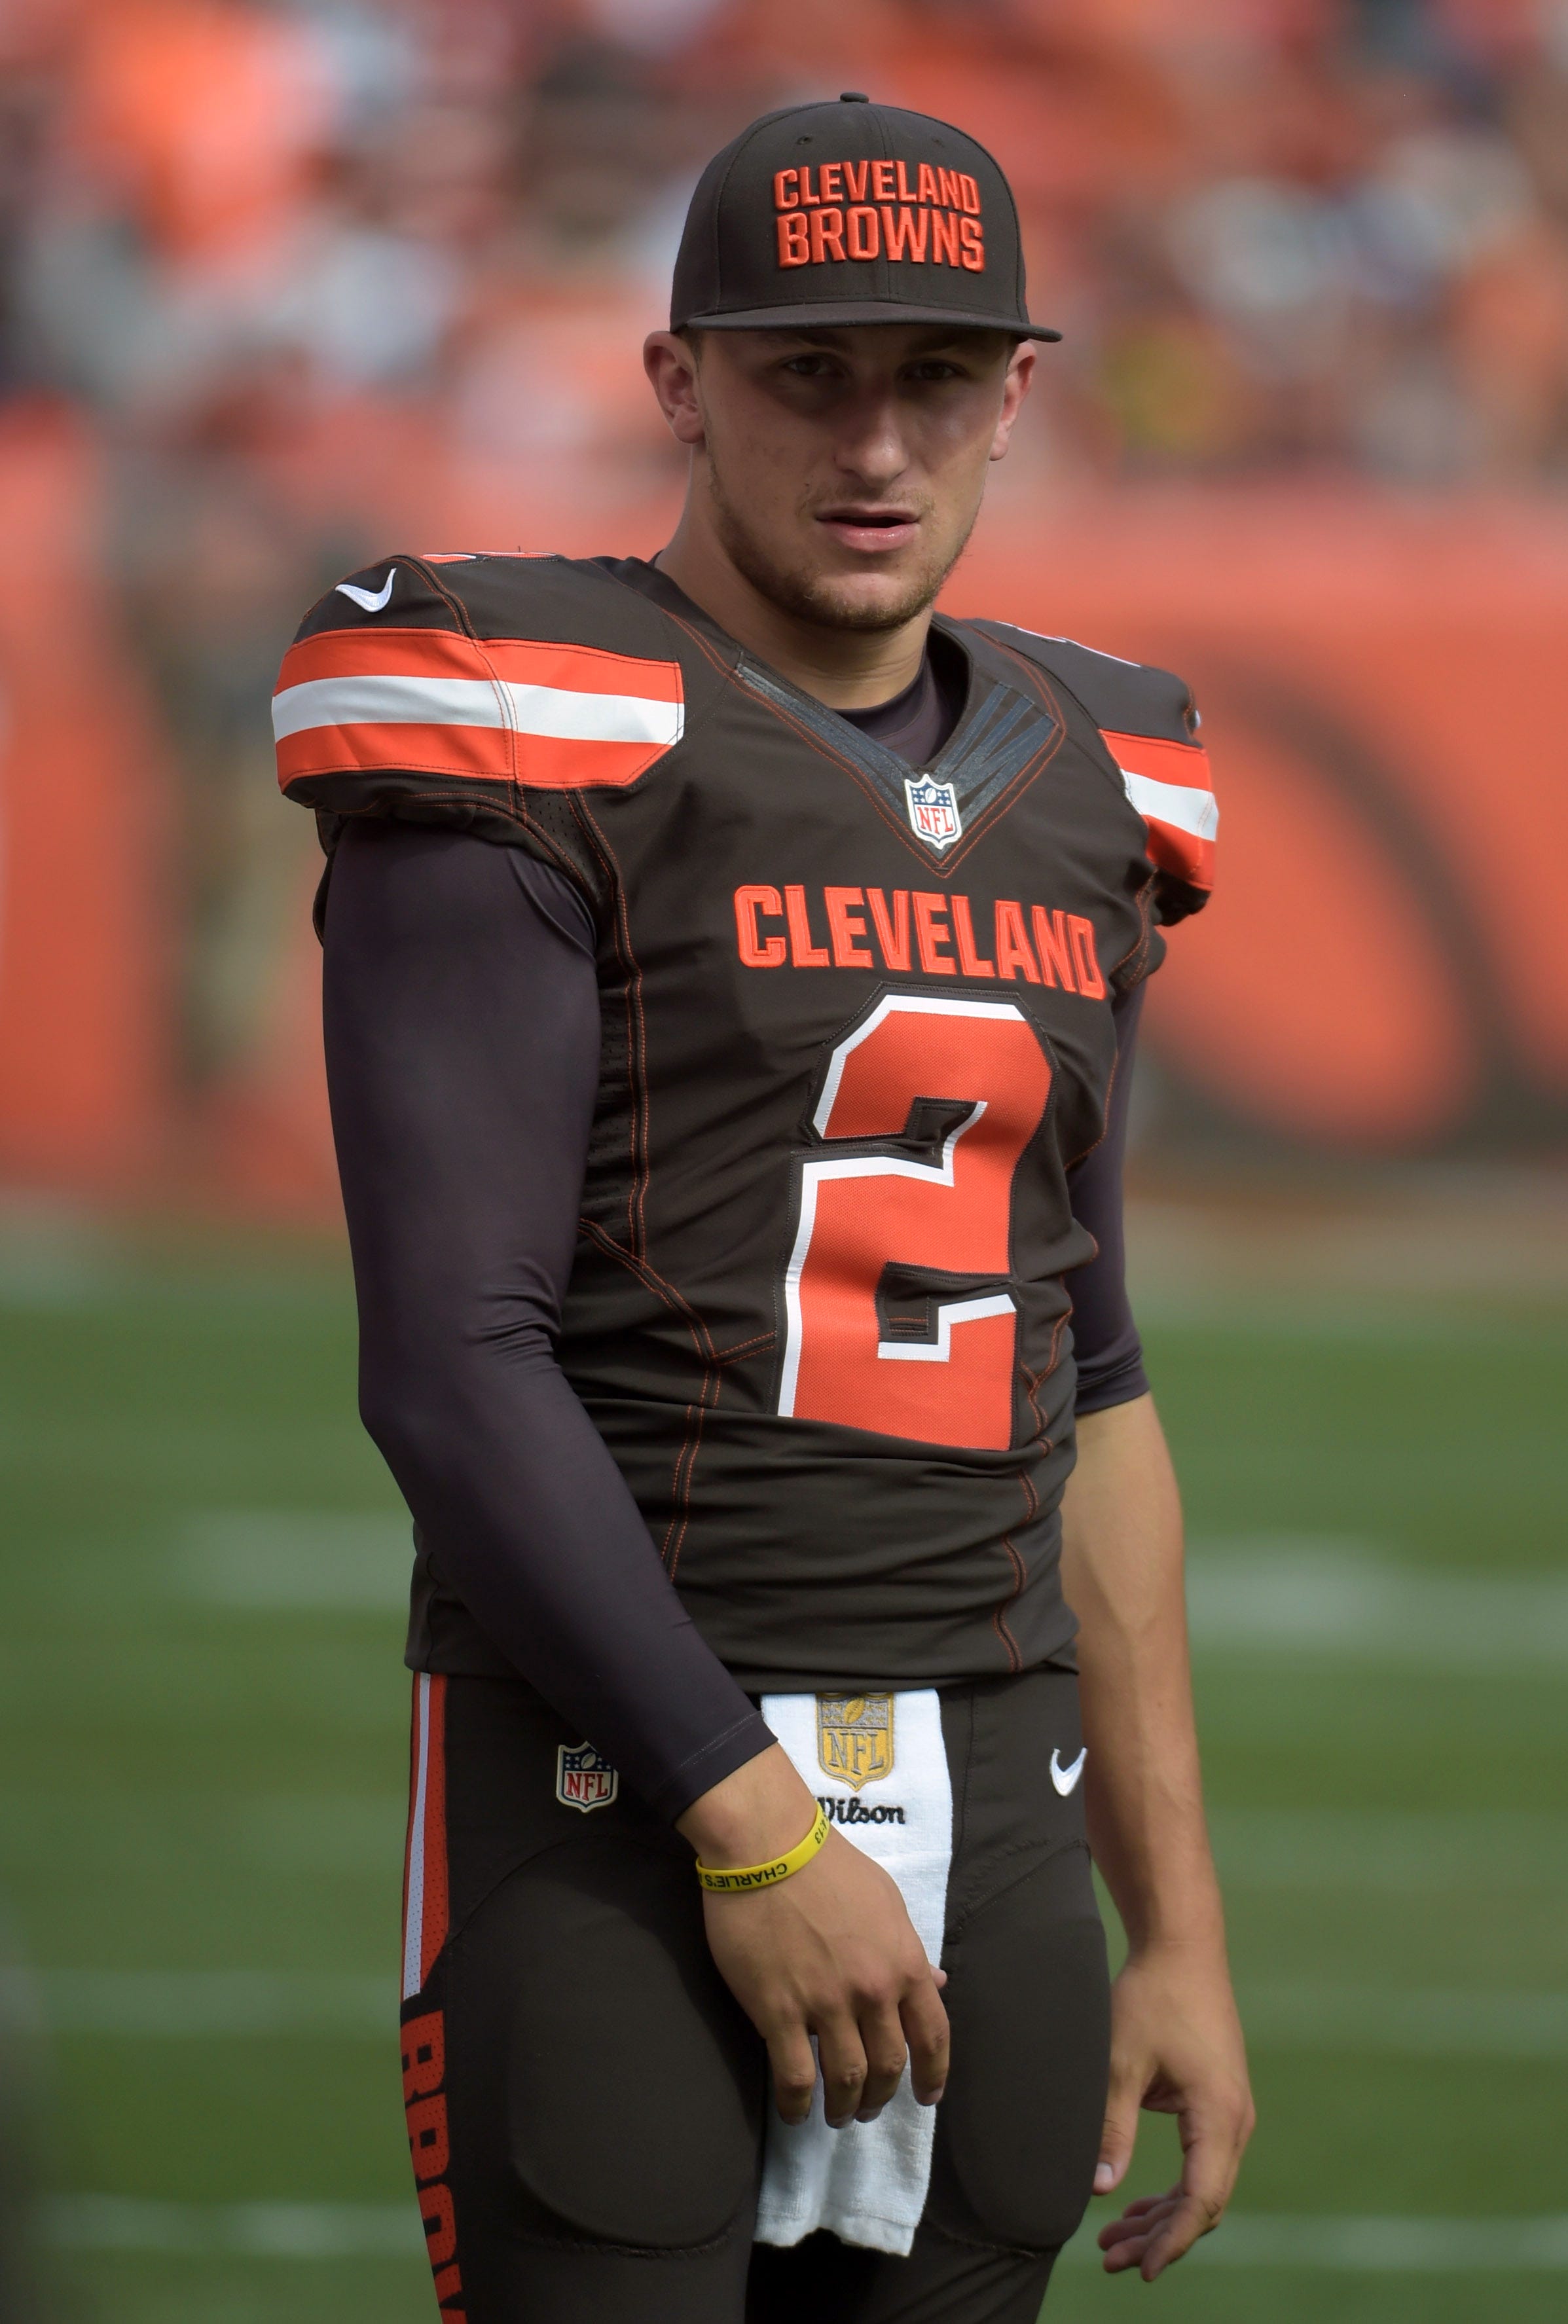 Johnny Manziel: I hope to 'take care of the issues,' play this